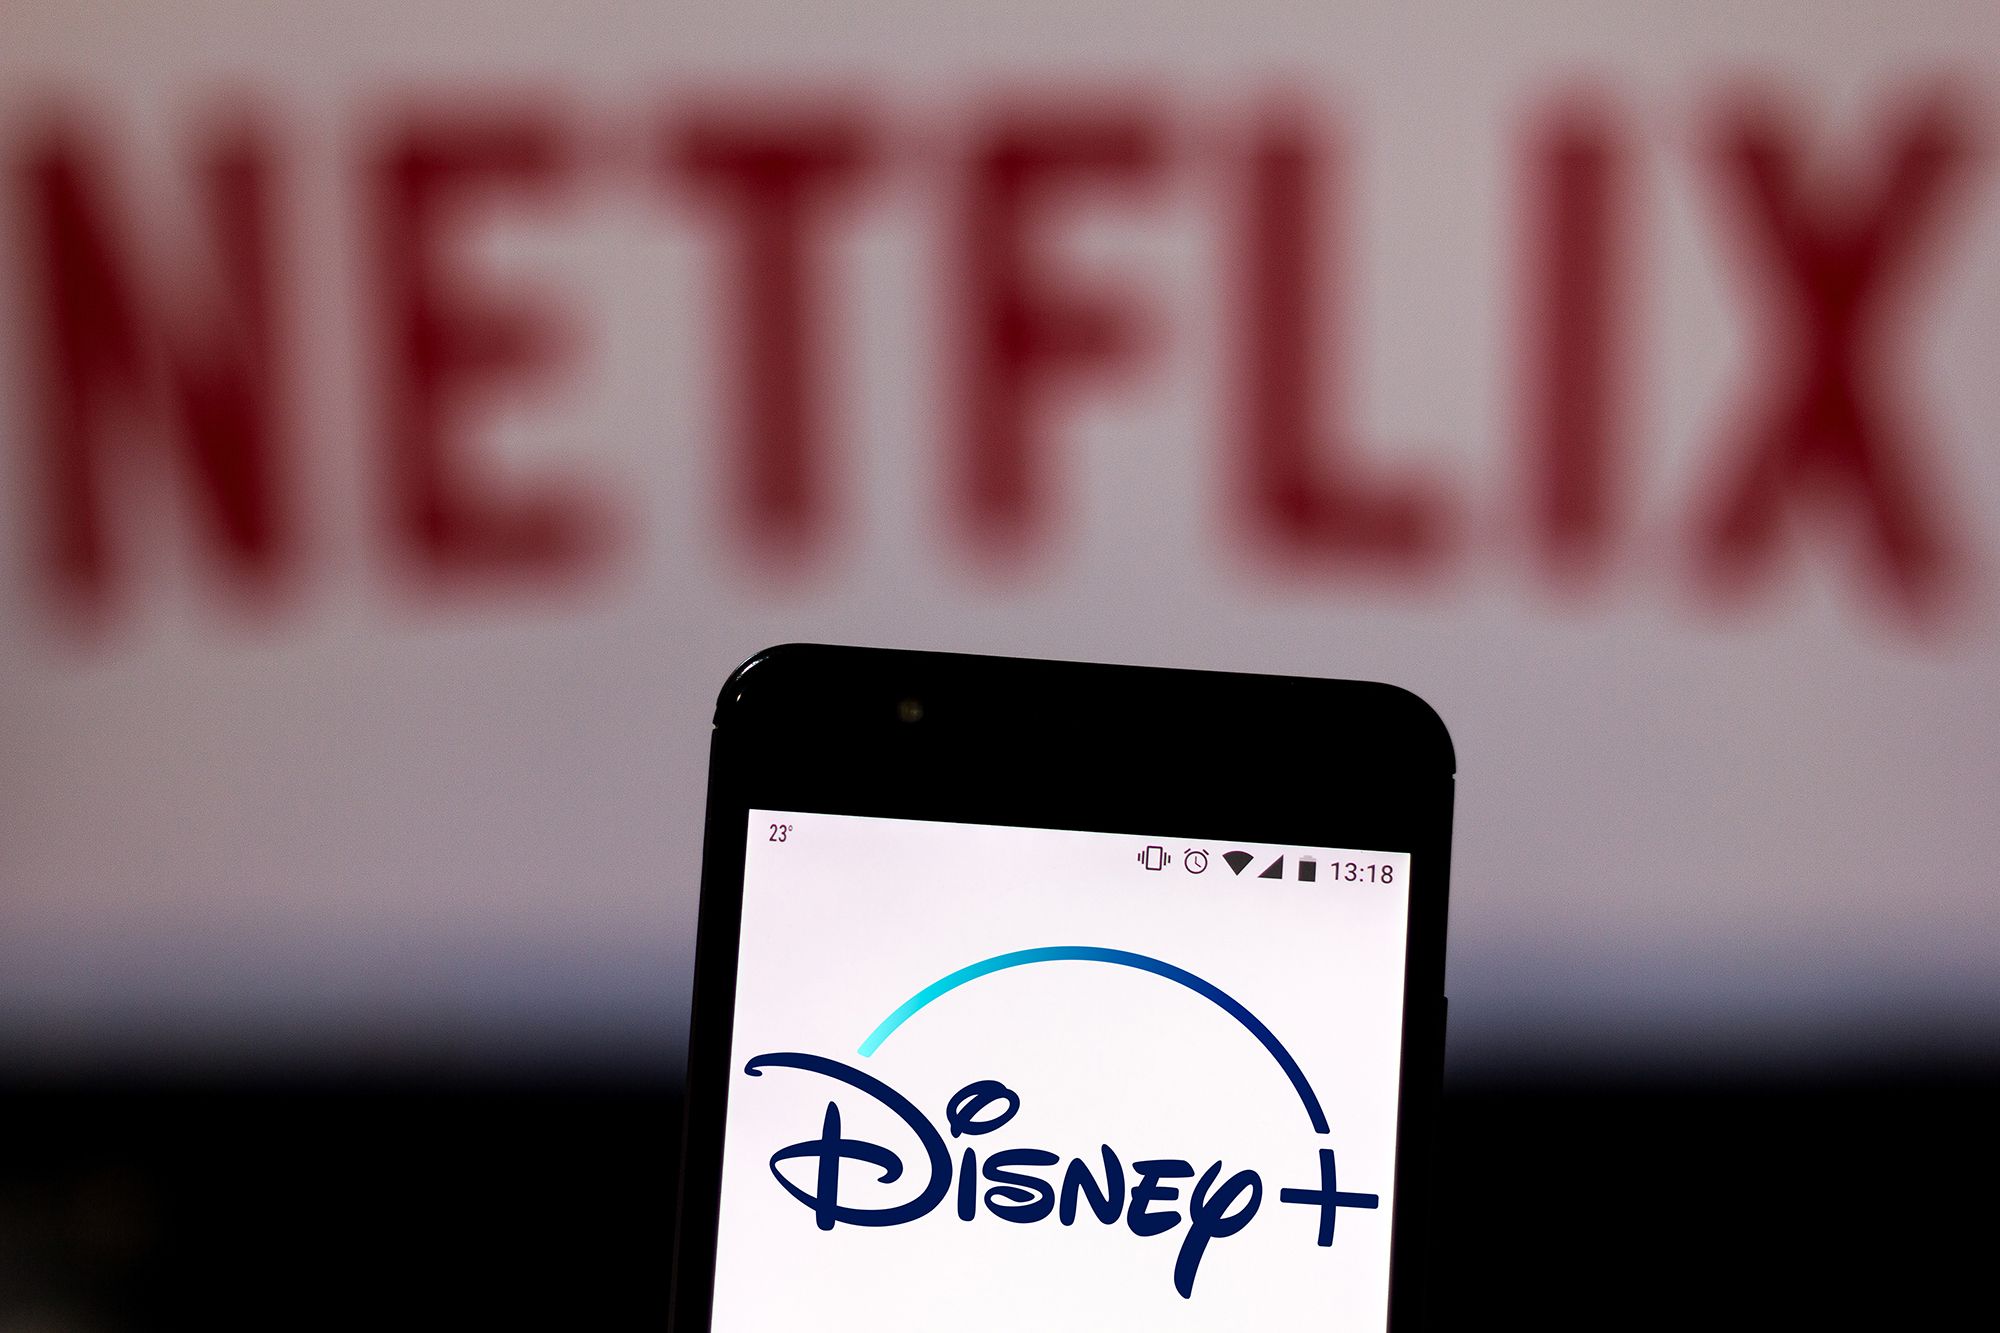 Disney+ to Unseat Netflix As Streaming Leader – Analysts